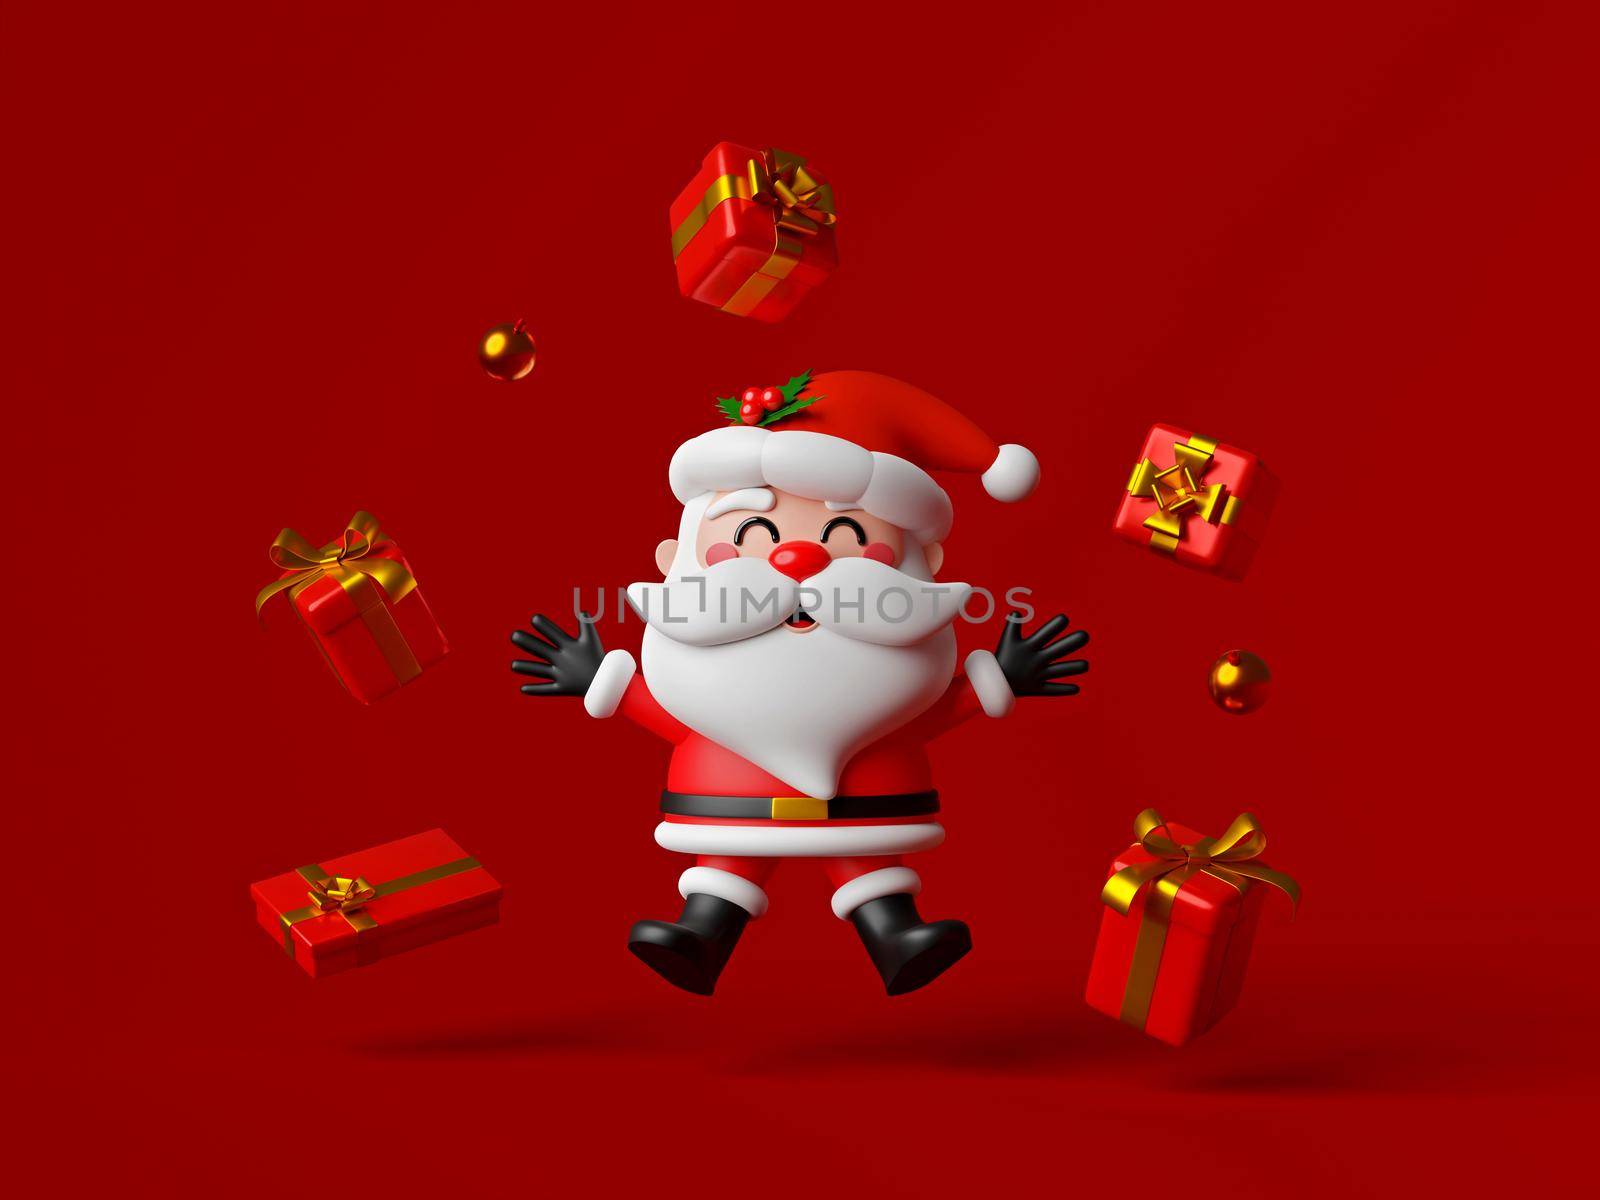 Santa Claus with Christmas gift on red background, Merry Christmas, 3d illustration by nutzchotwarut